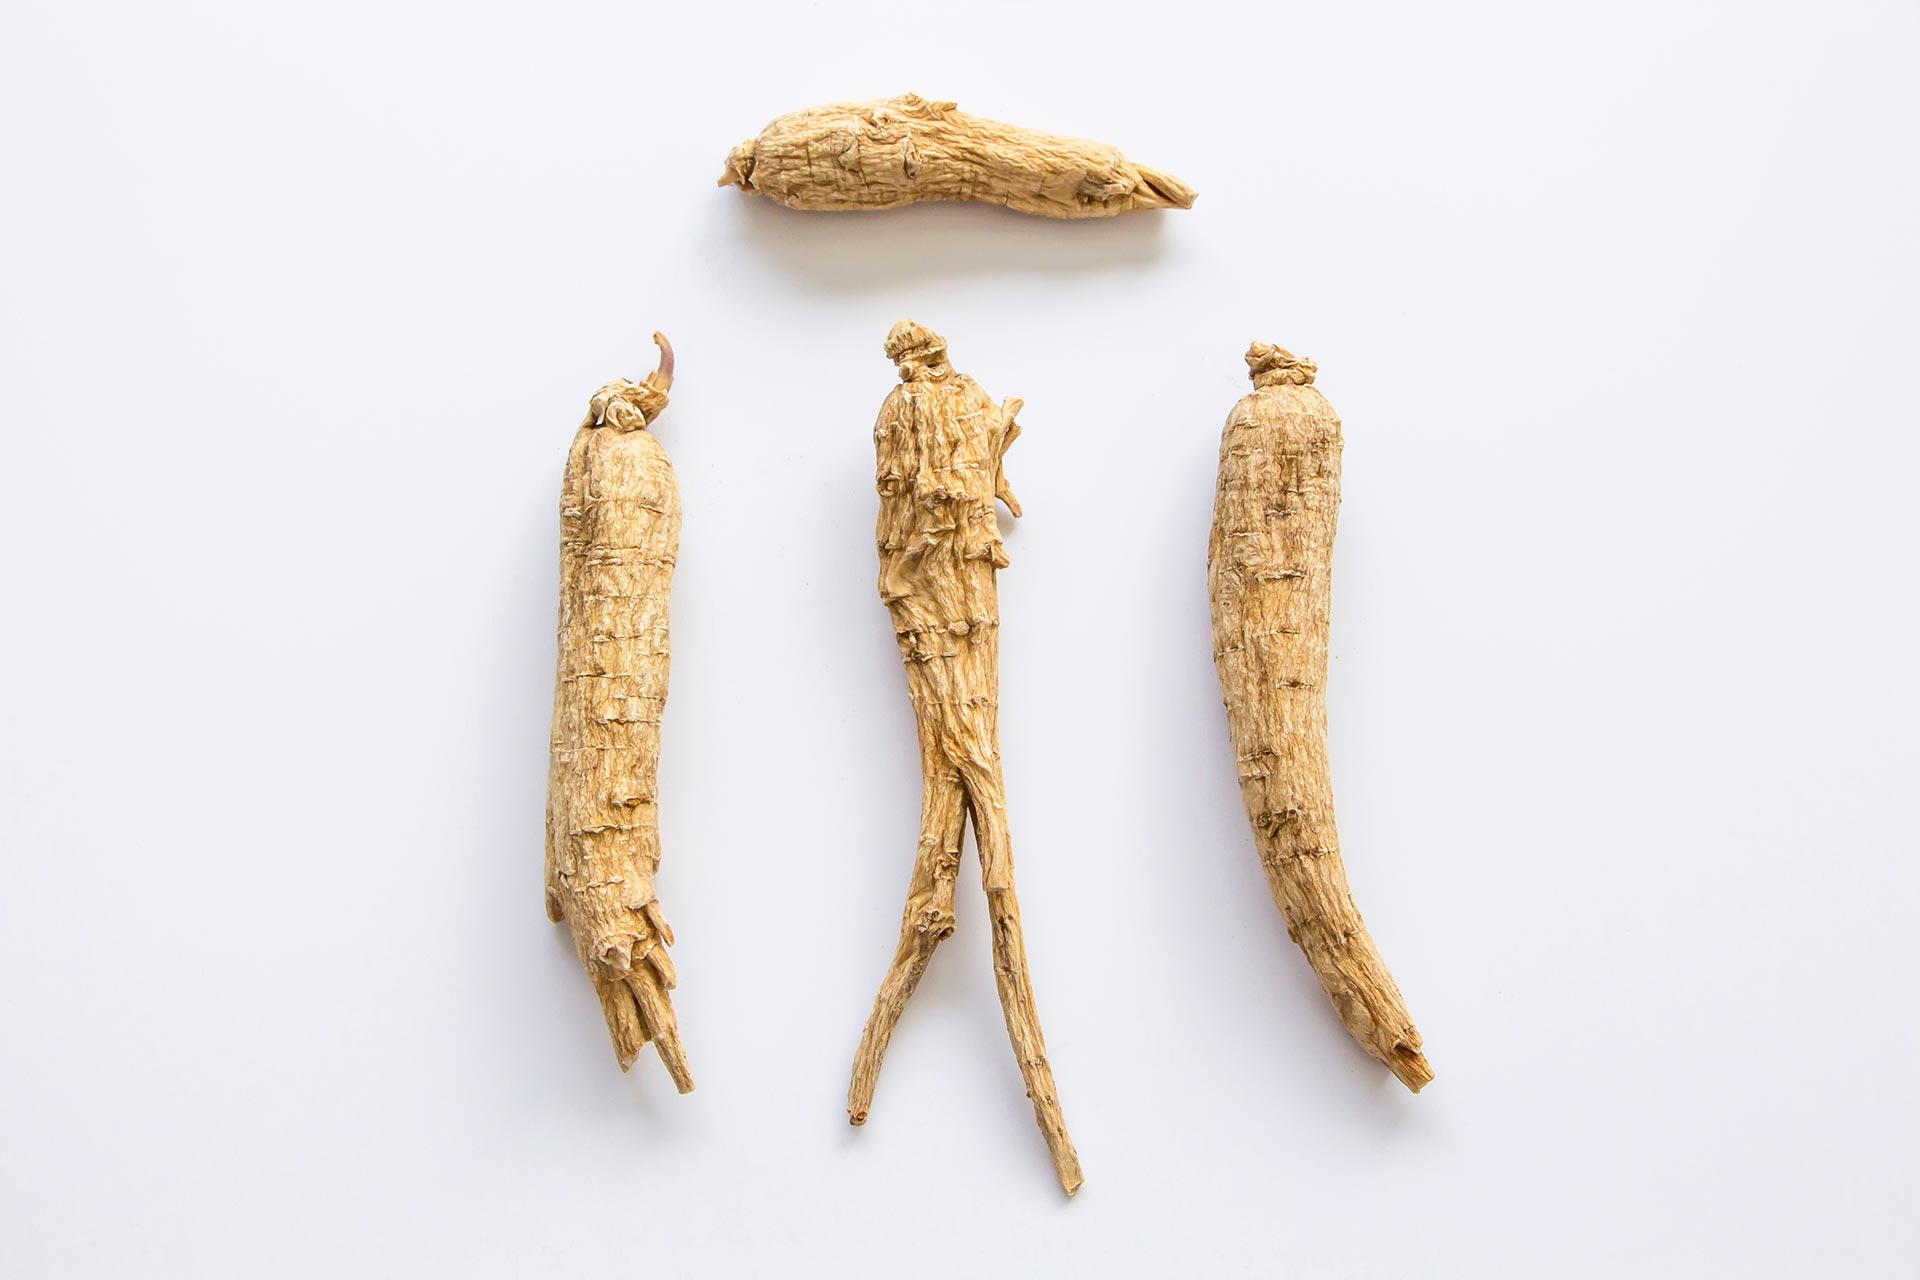 Pieces of raw American ginseng